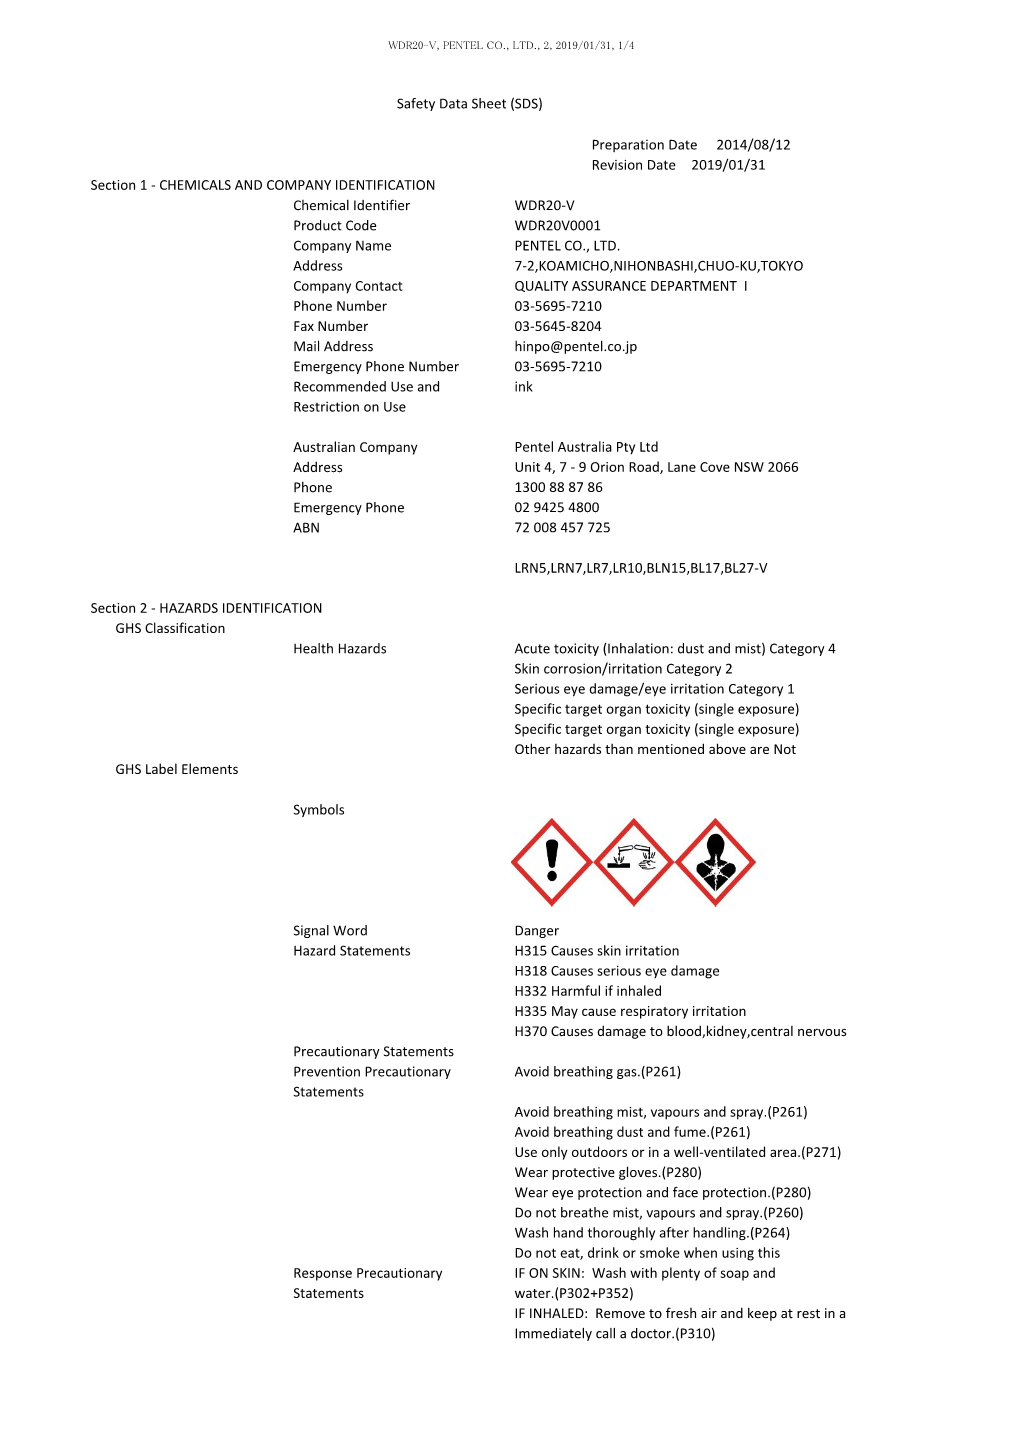 CHEMICALS and COMPANY IDENTIFICATION Chemical Identifier WDR20-V Product Code WDR20V0001 Company Name PENTEL CO., LTD